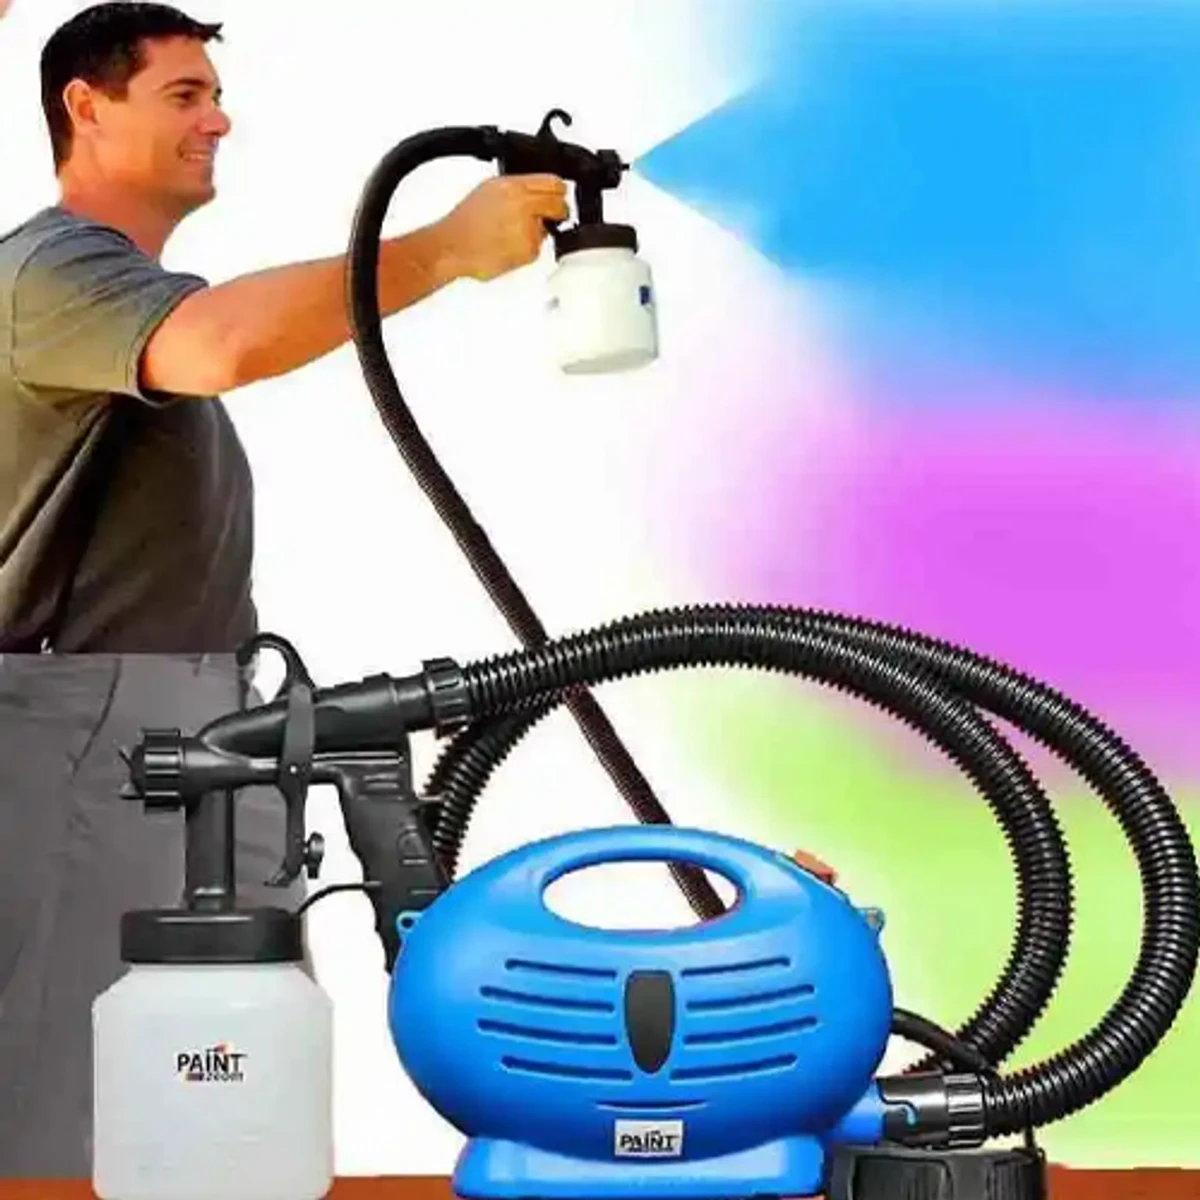 Product details of Paint Zoom Professional Electric Paint Sprayer – Blue and Black